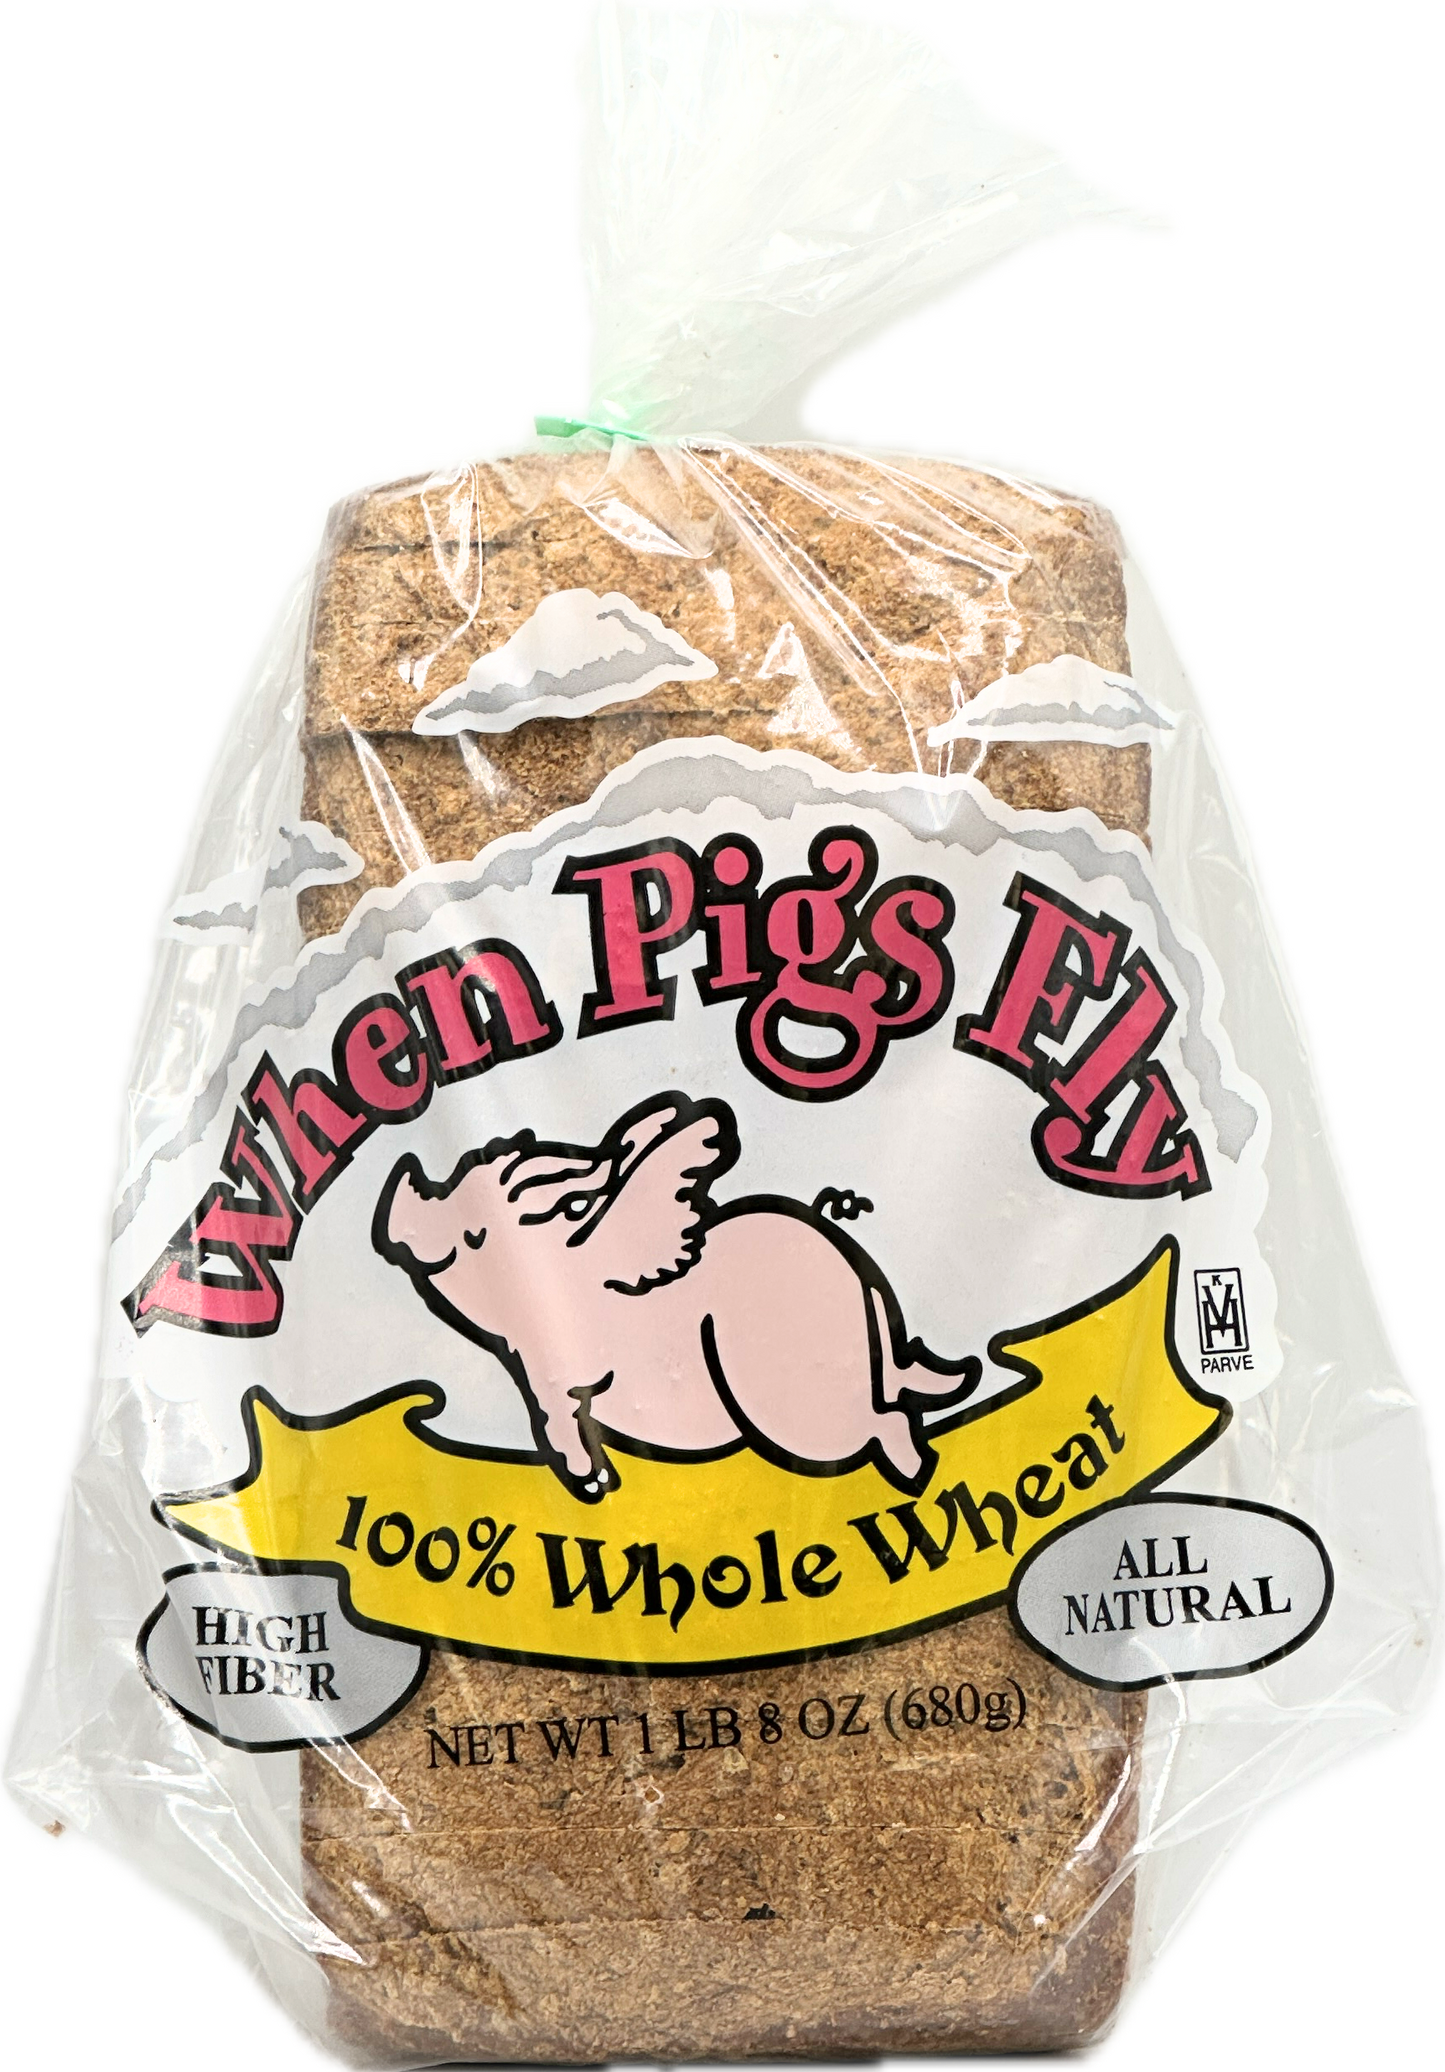 When Pigs Fly 100% Whole Wheat Bread